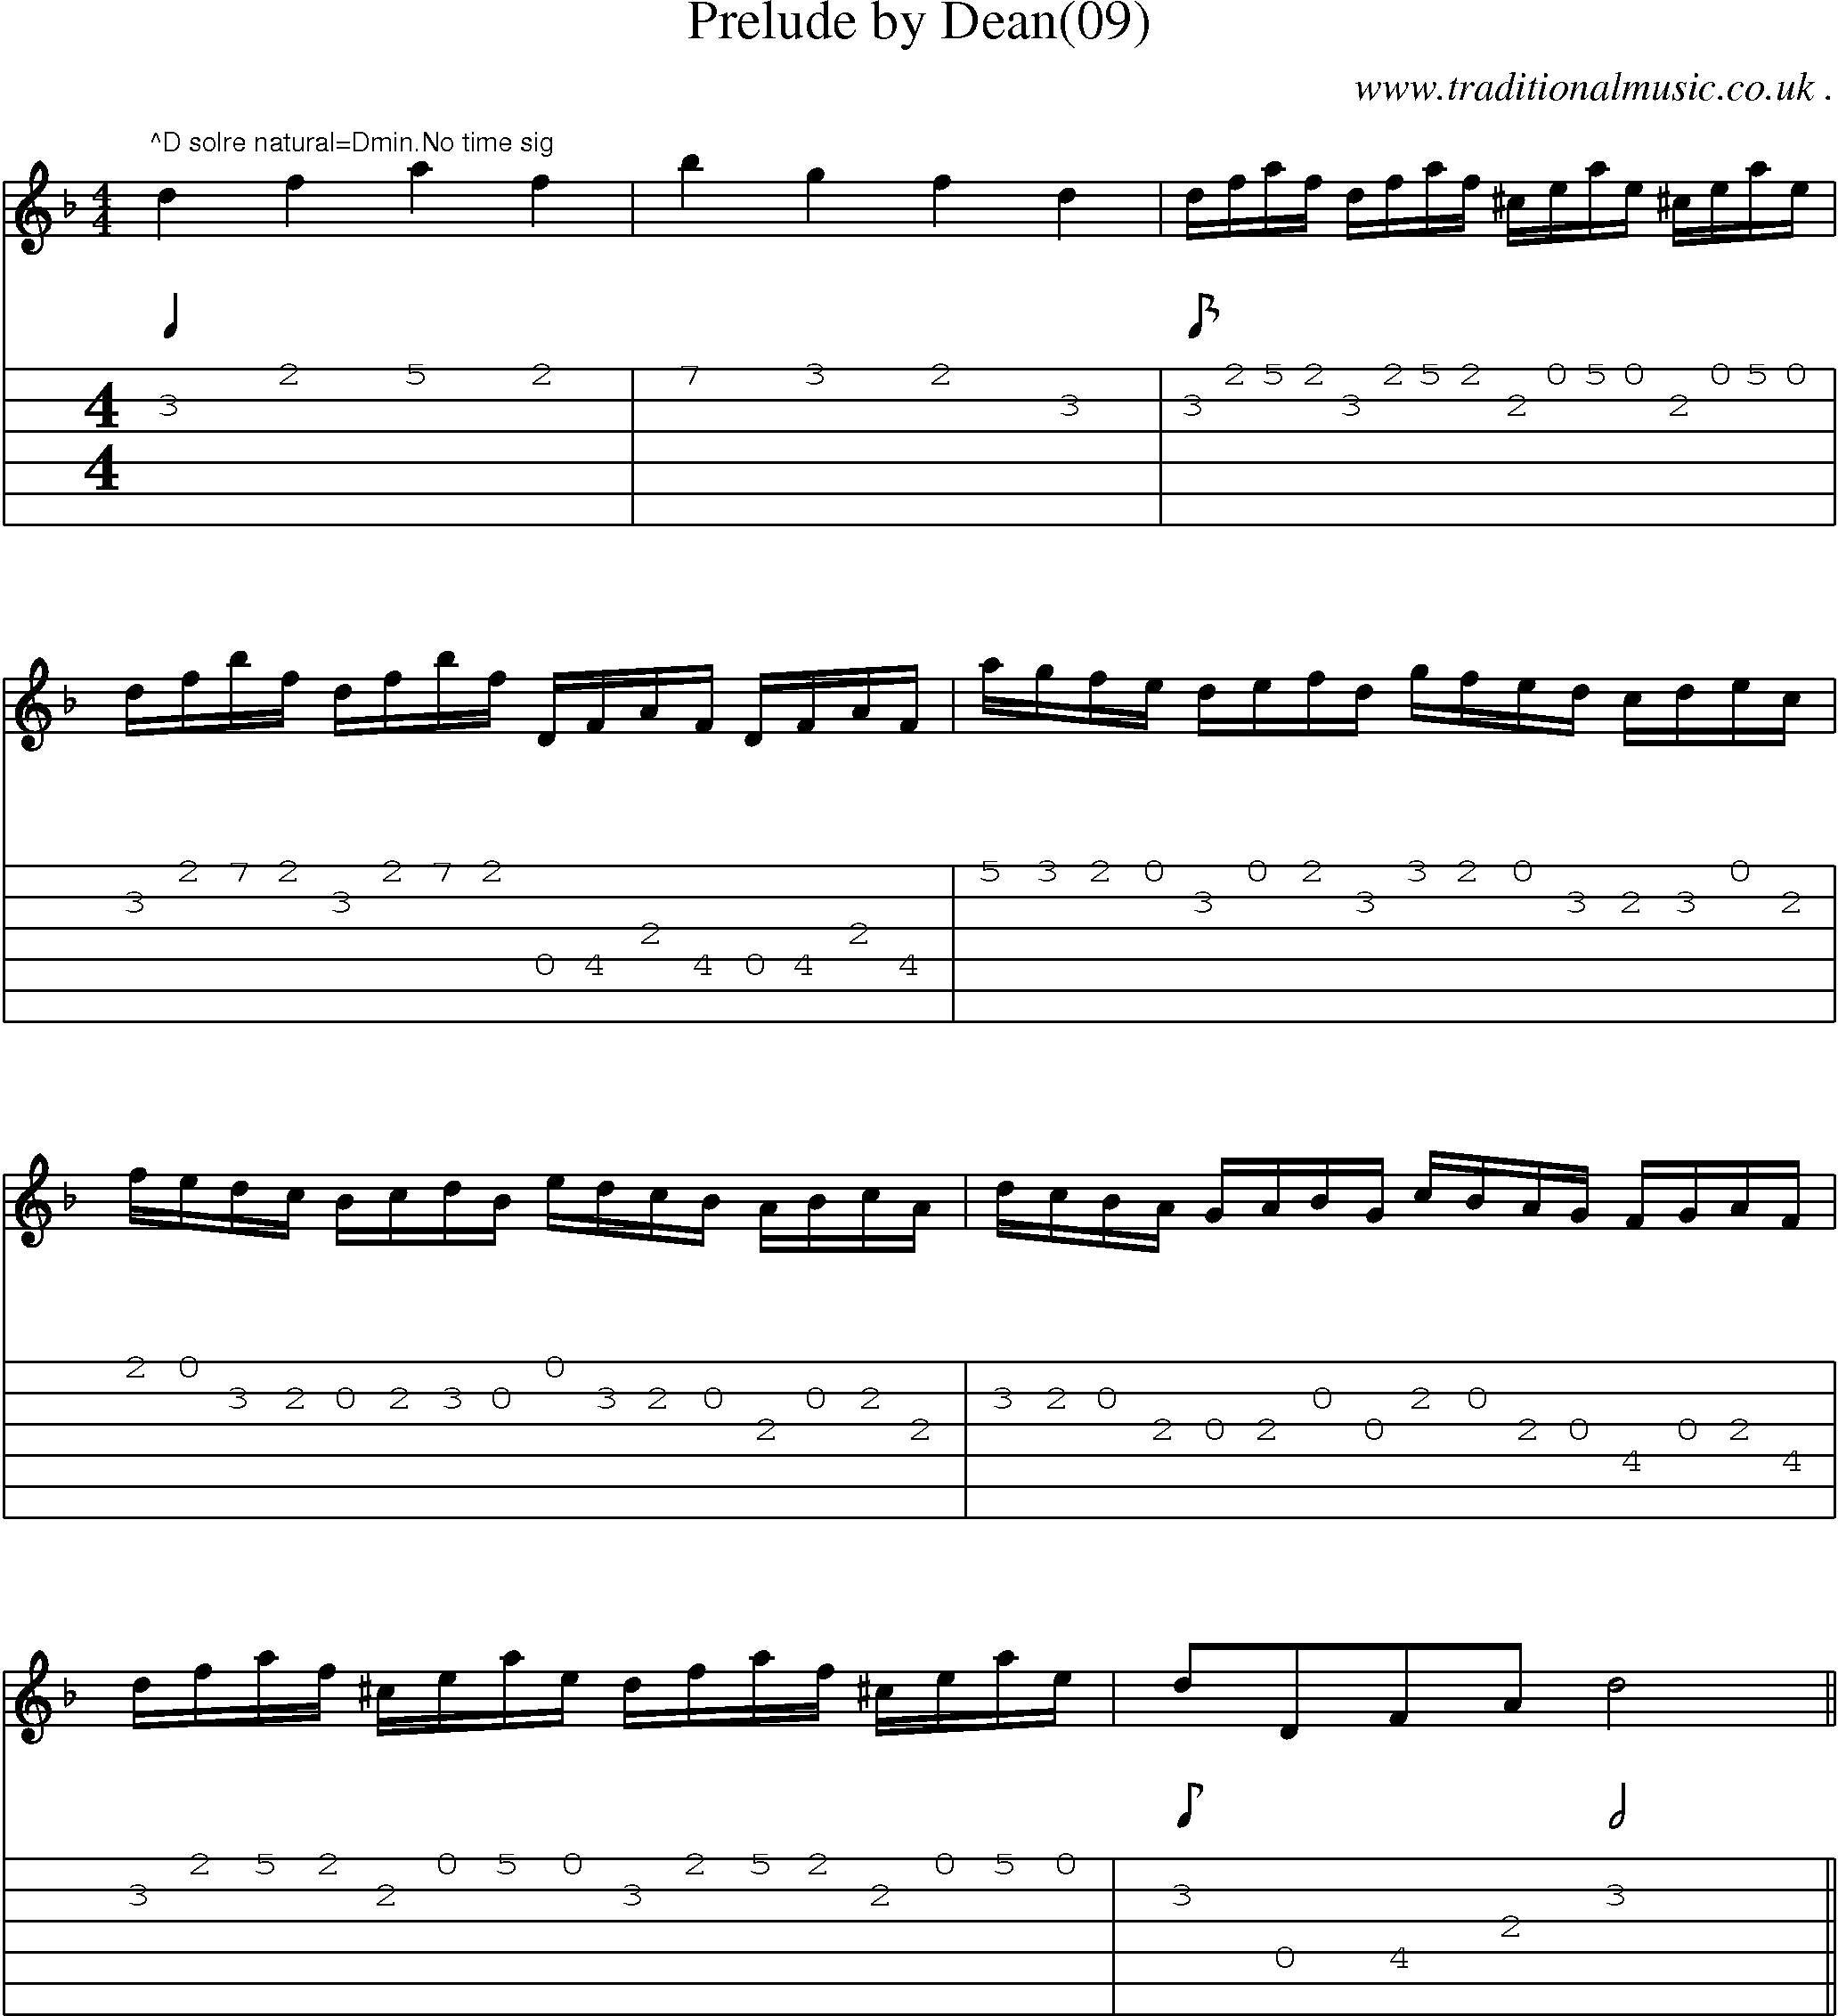 Sheet-Music and Guitar Tabs for Prelude By Dean(09)